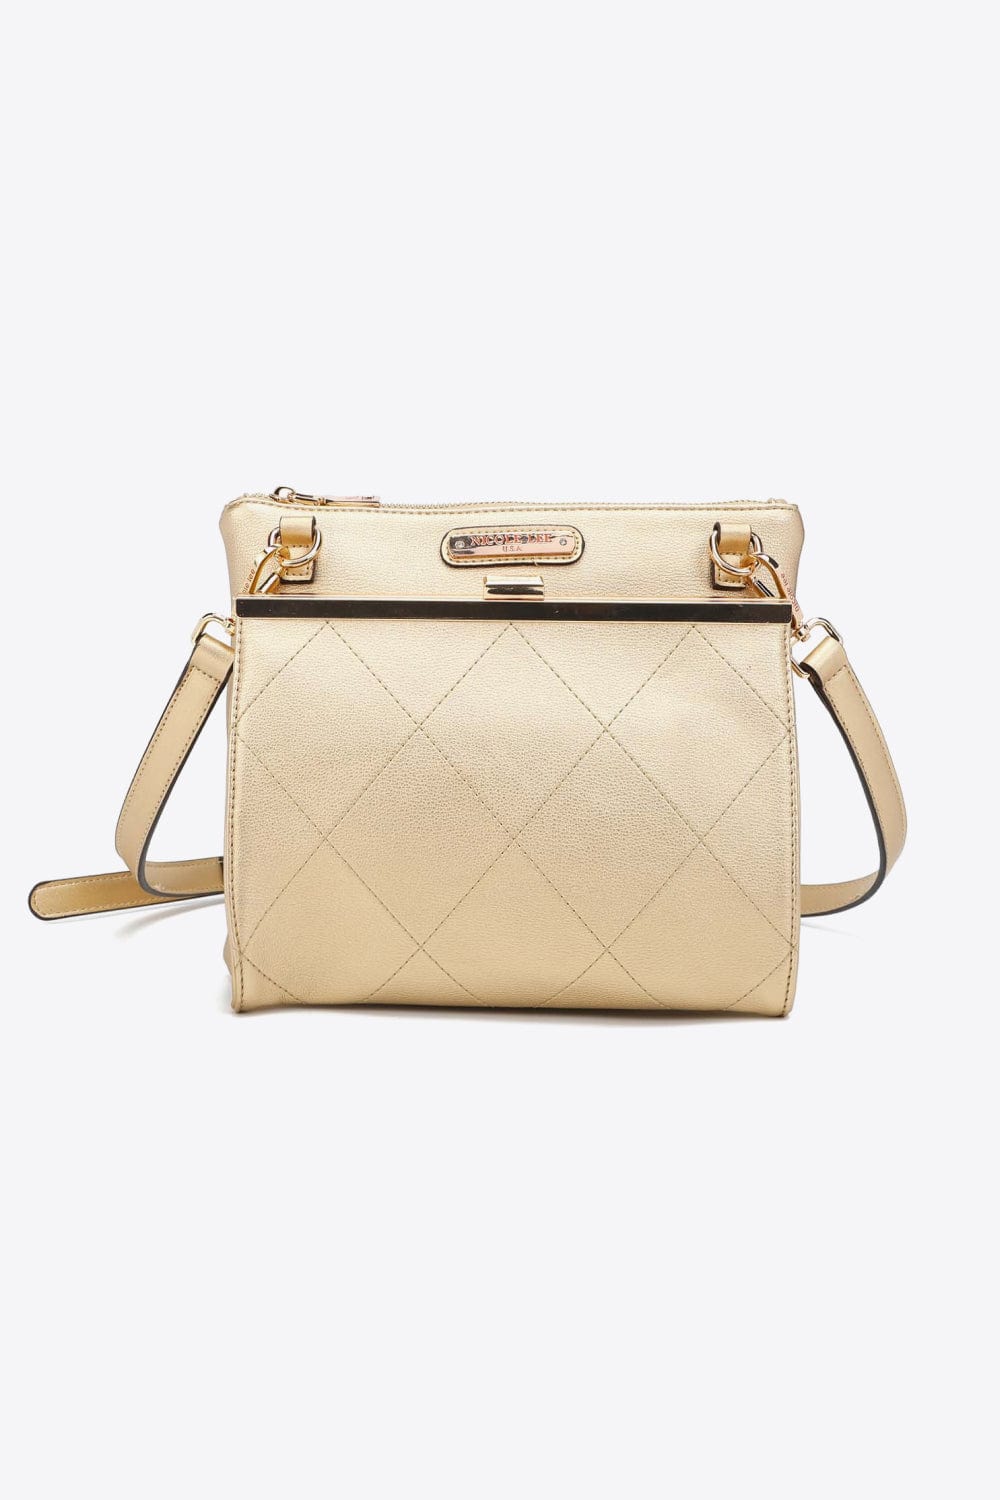 Nicole Lee Corporate - The Nicole Lee Crossbody Wallet its practical and  stylish perfect for those days you don't feel like carrying a purse.  #nicoleleeusa #nicolelee #nicoleleeEspaña #nllook #crossbody SHOP NOW:  https://nicoleleeonline.com/stylish ...